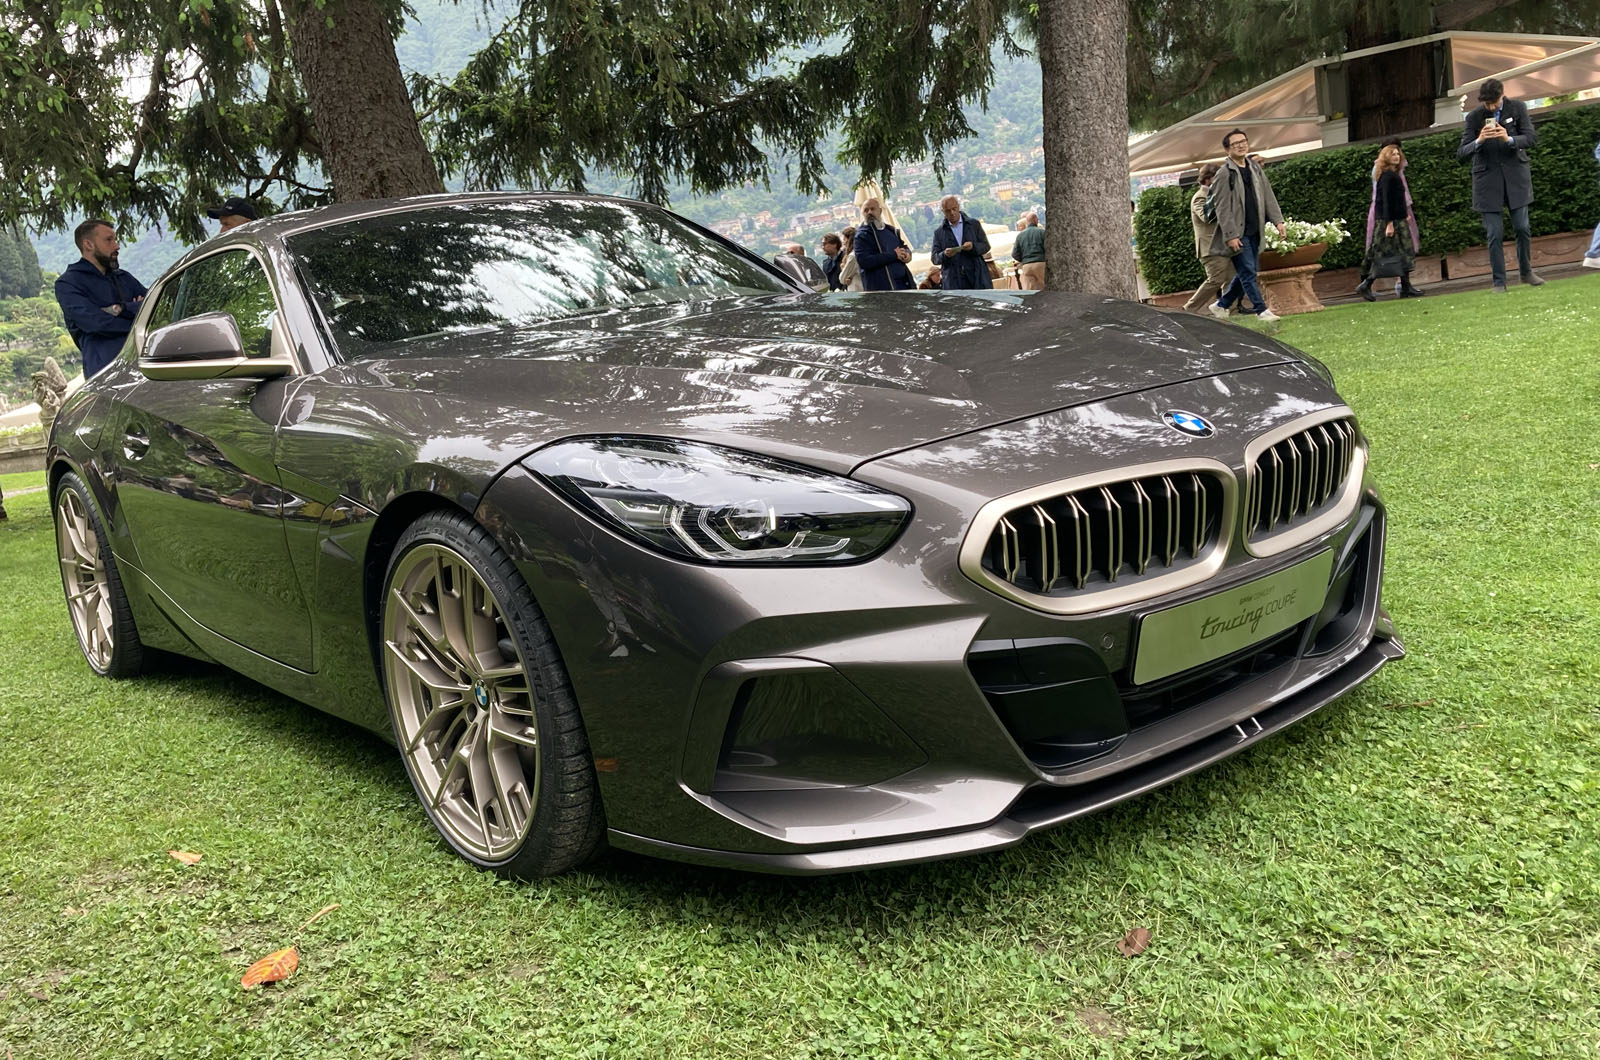 BMW Z4 Touring concept channels spirit of Z3 Coupe